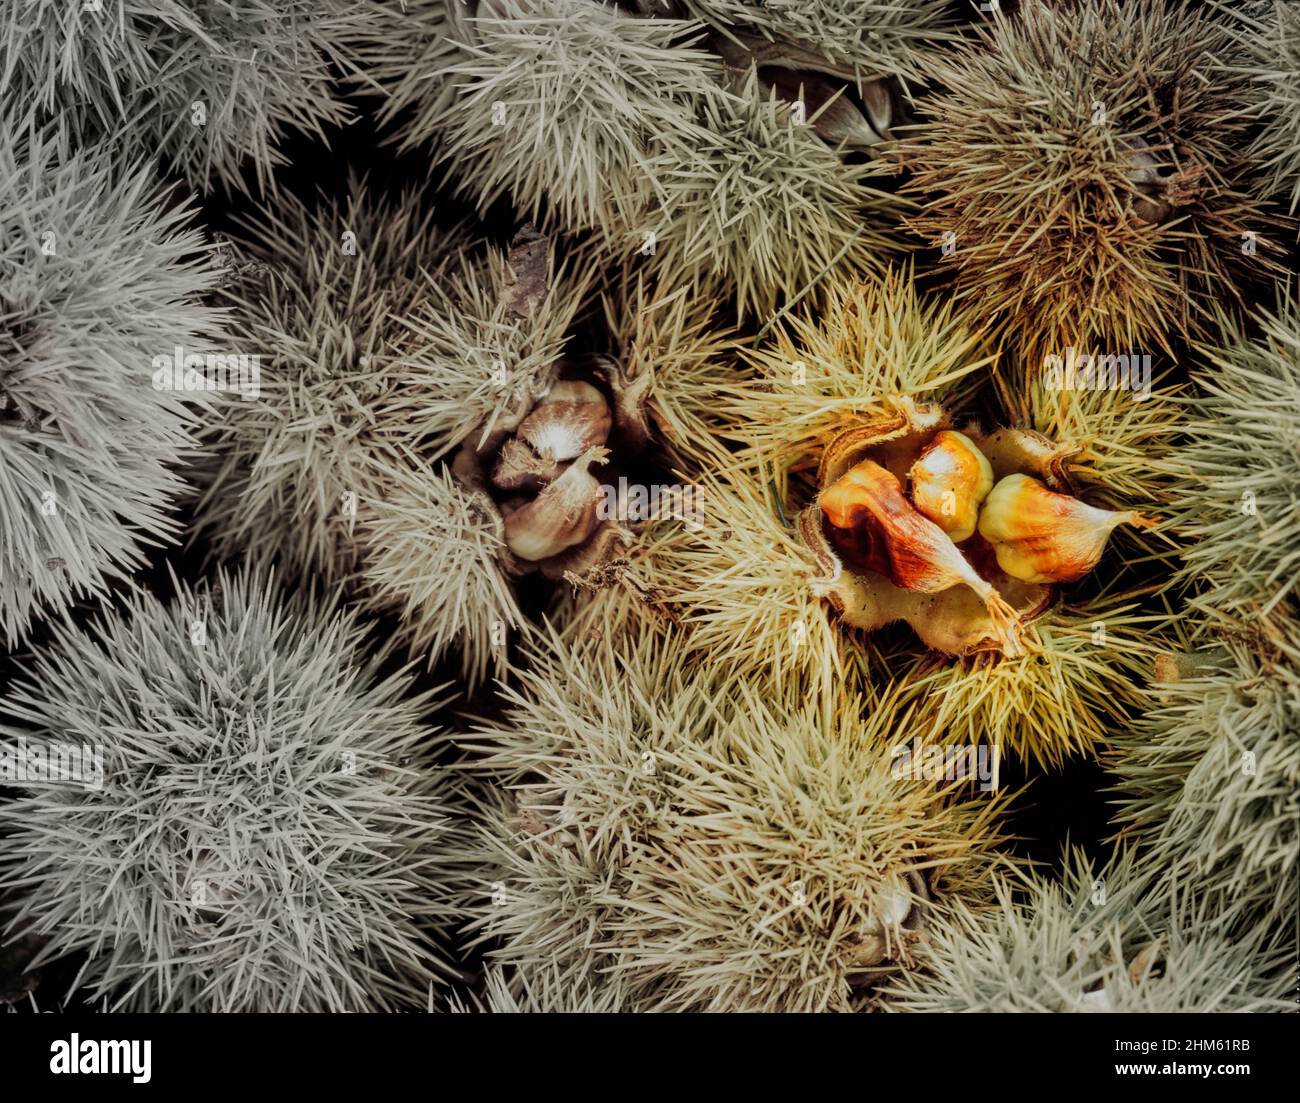 Macro natural forage food portrait of Castanea sativa, sweet chestnut, patterns and textures in nature Stock Photo